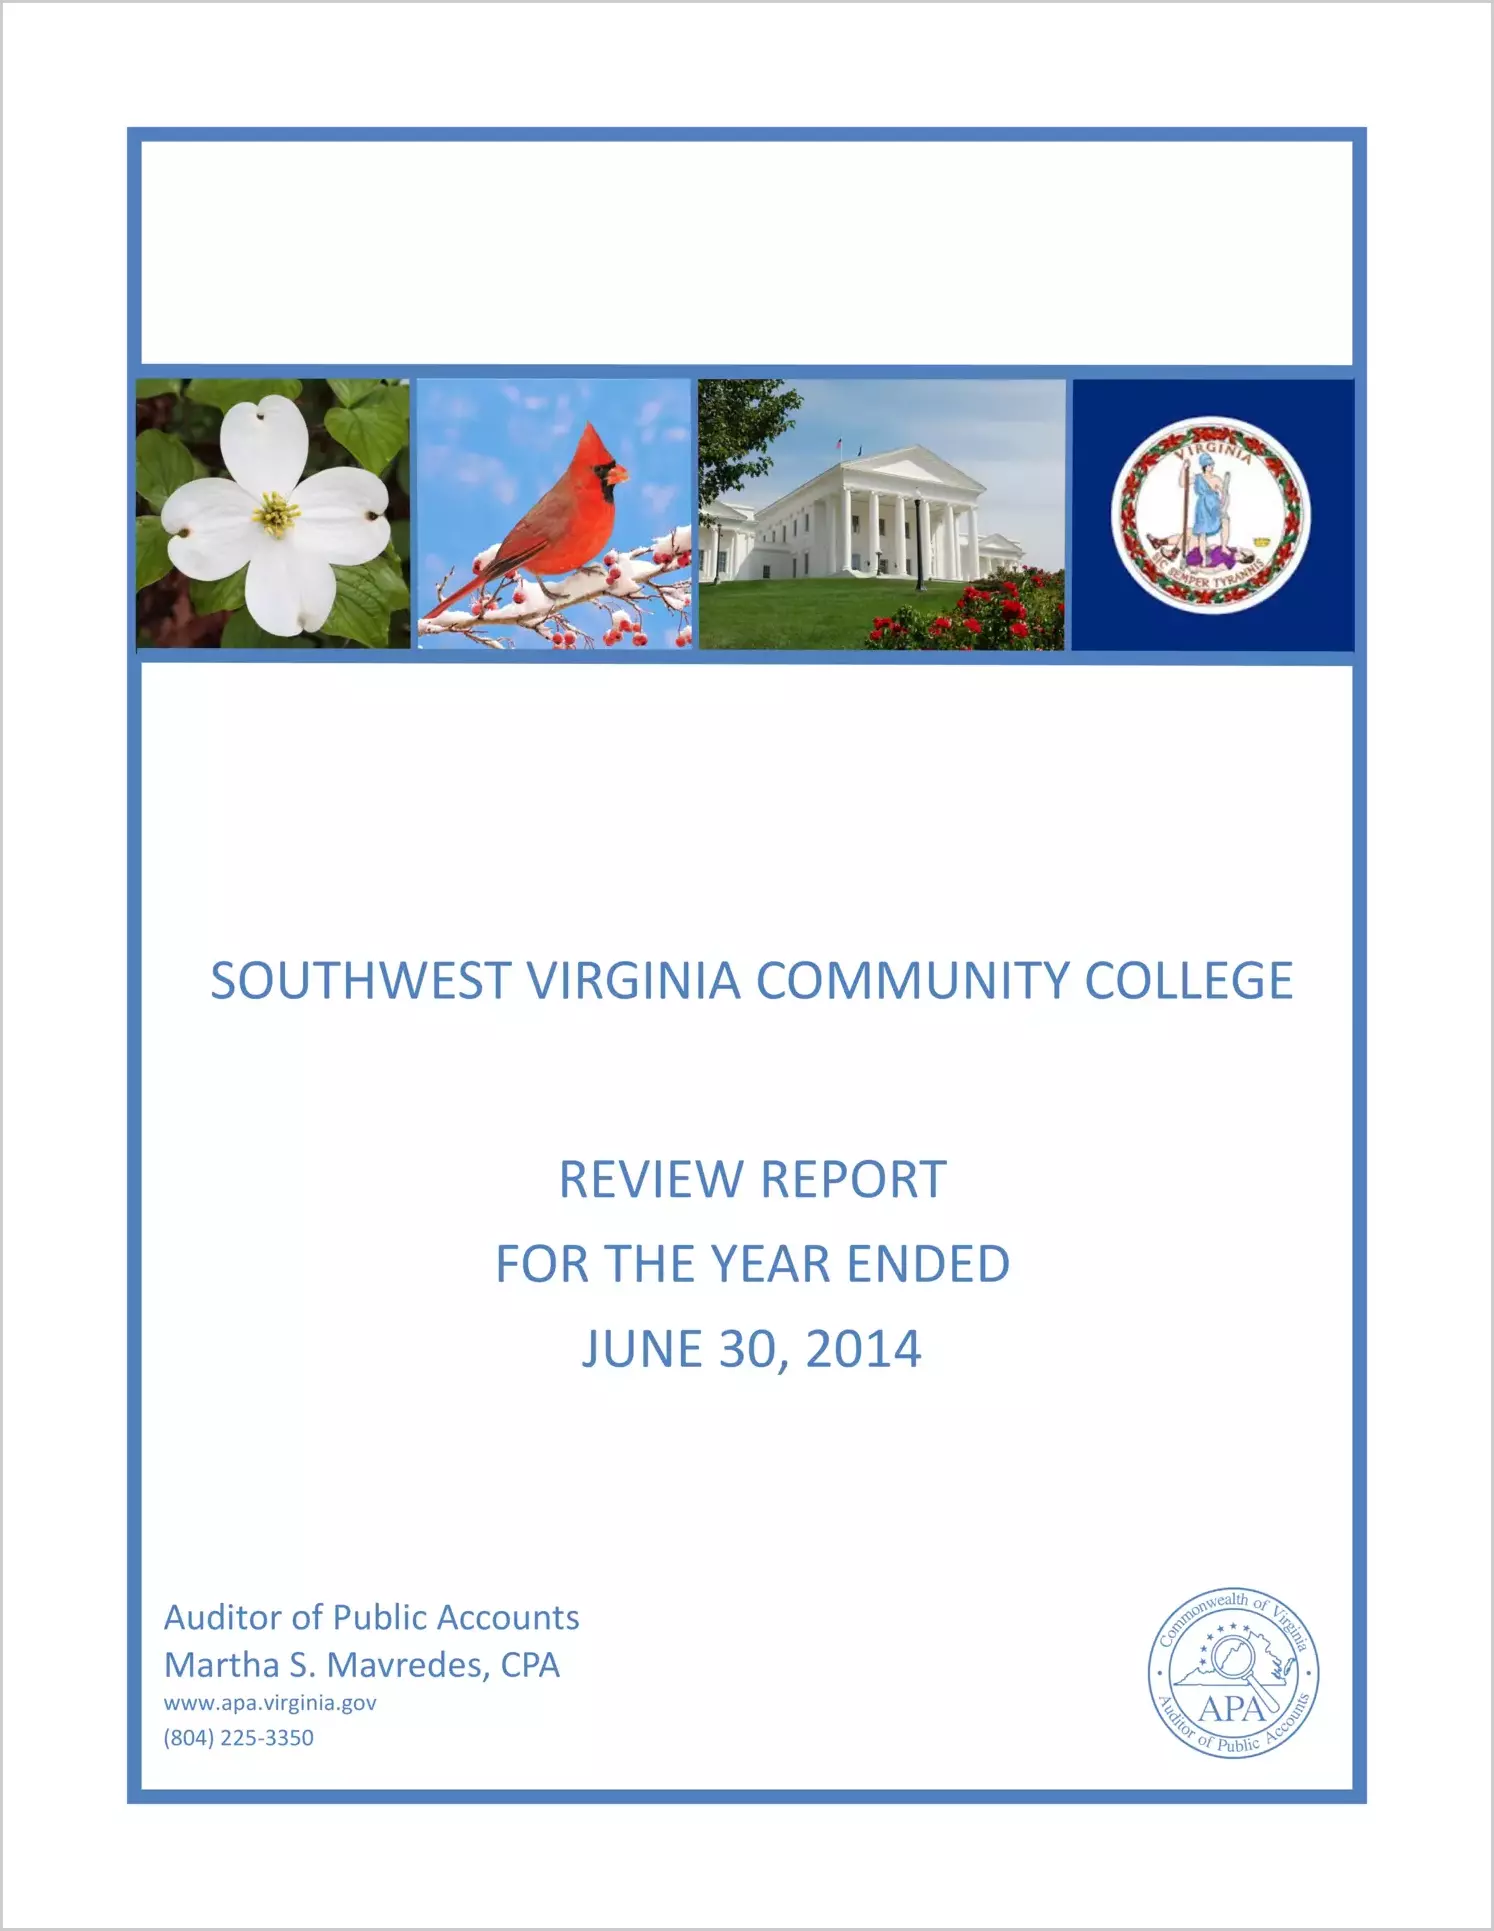 Southwest Virginia Community College for the year ended June 30, 2014